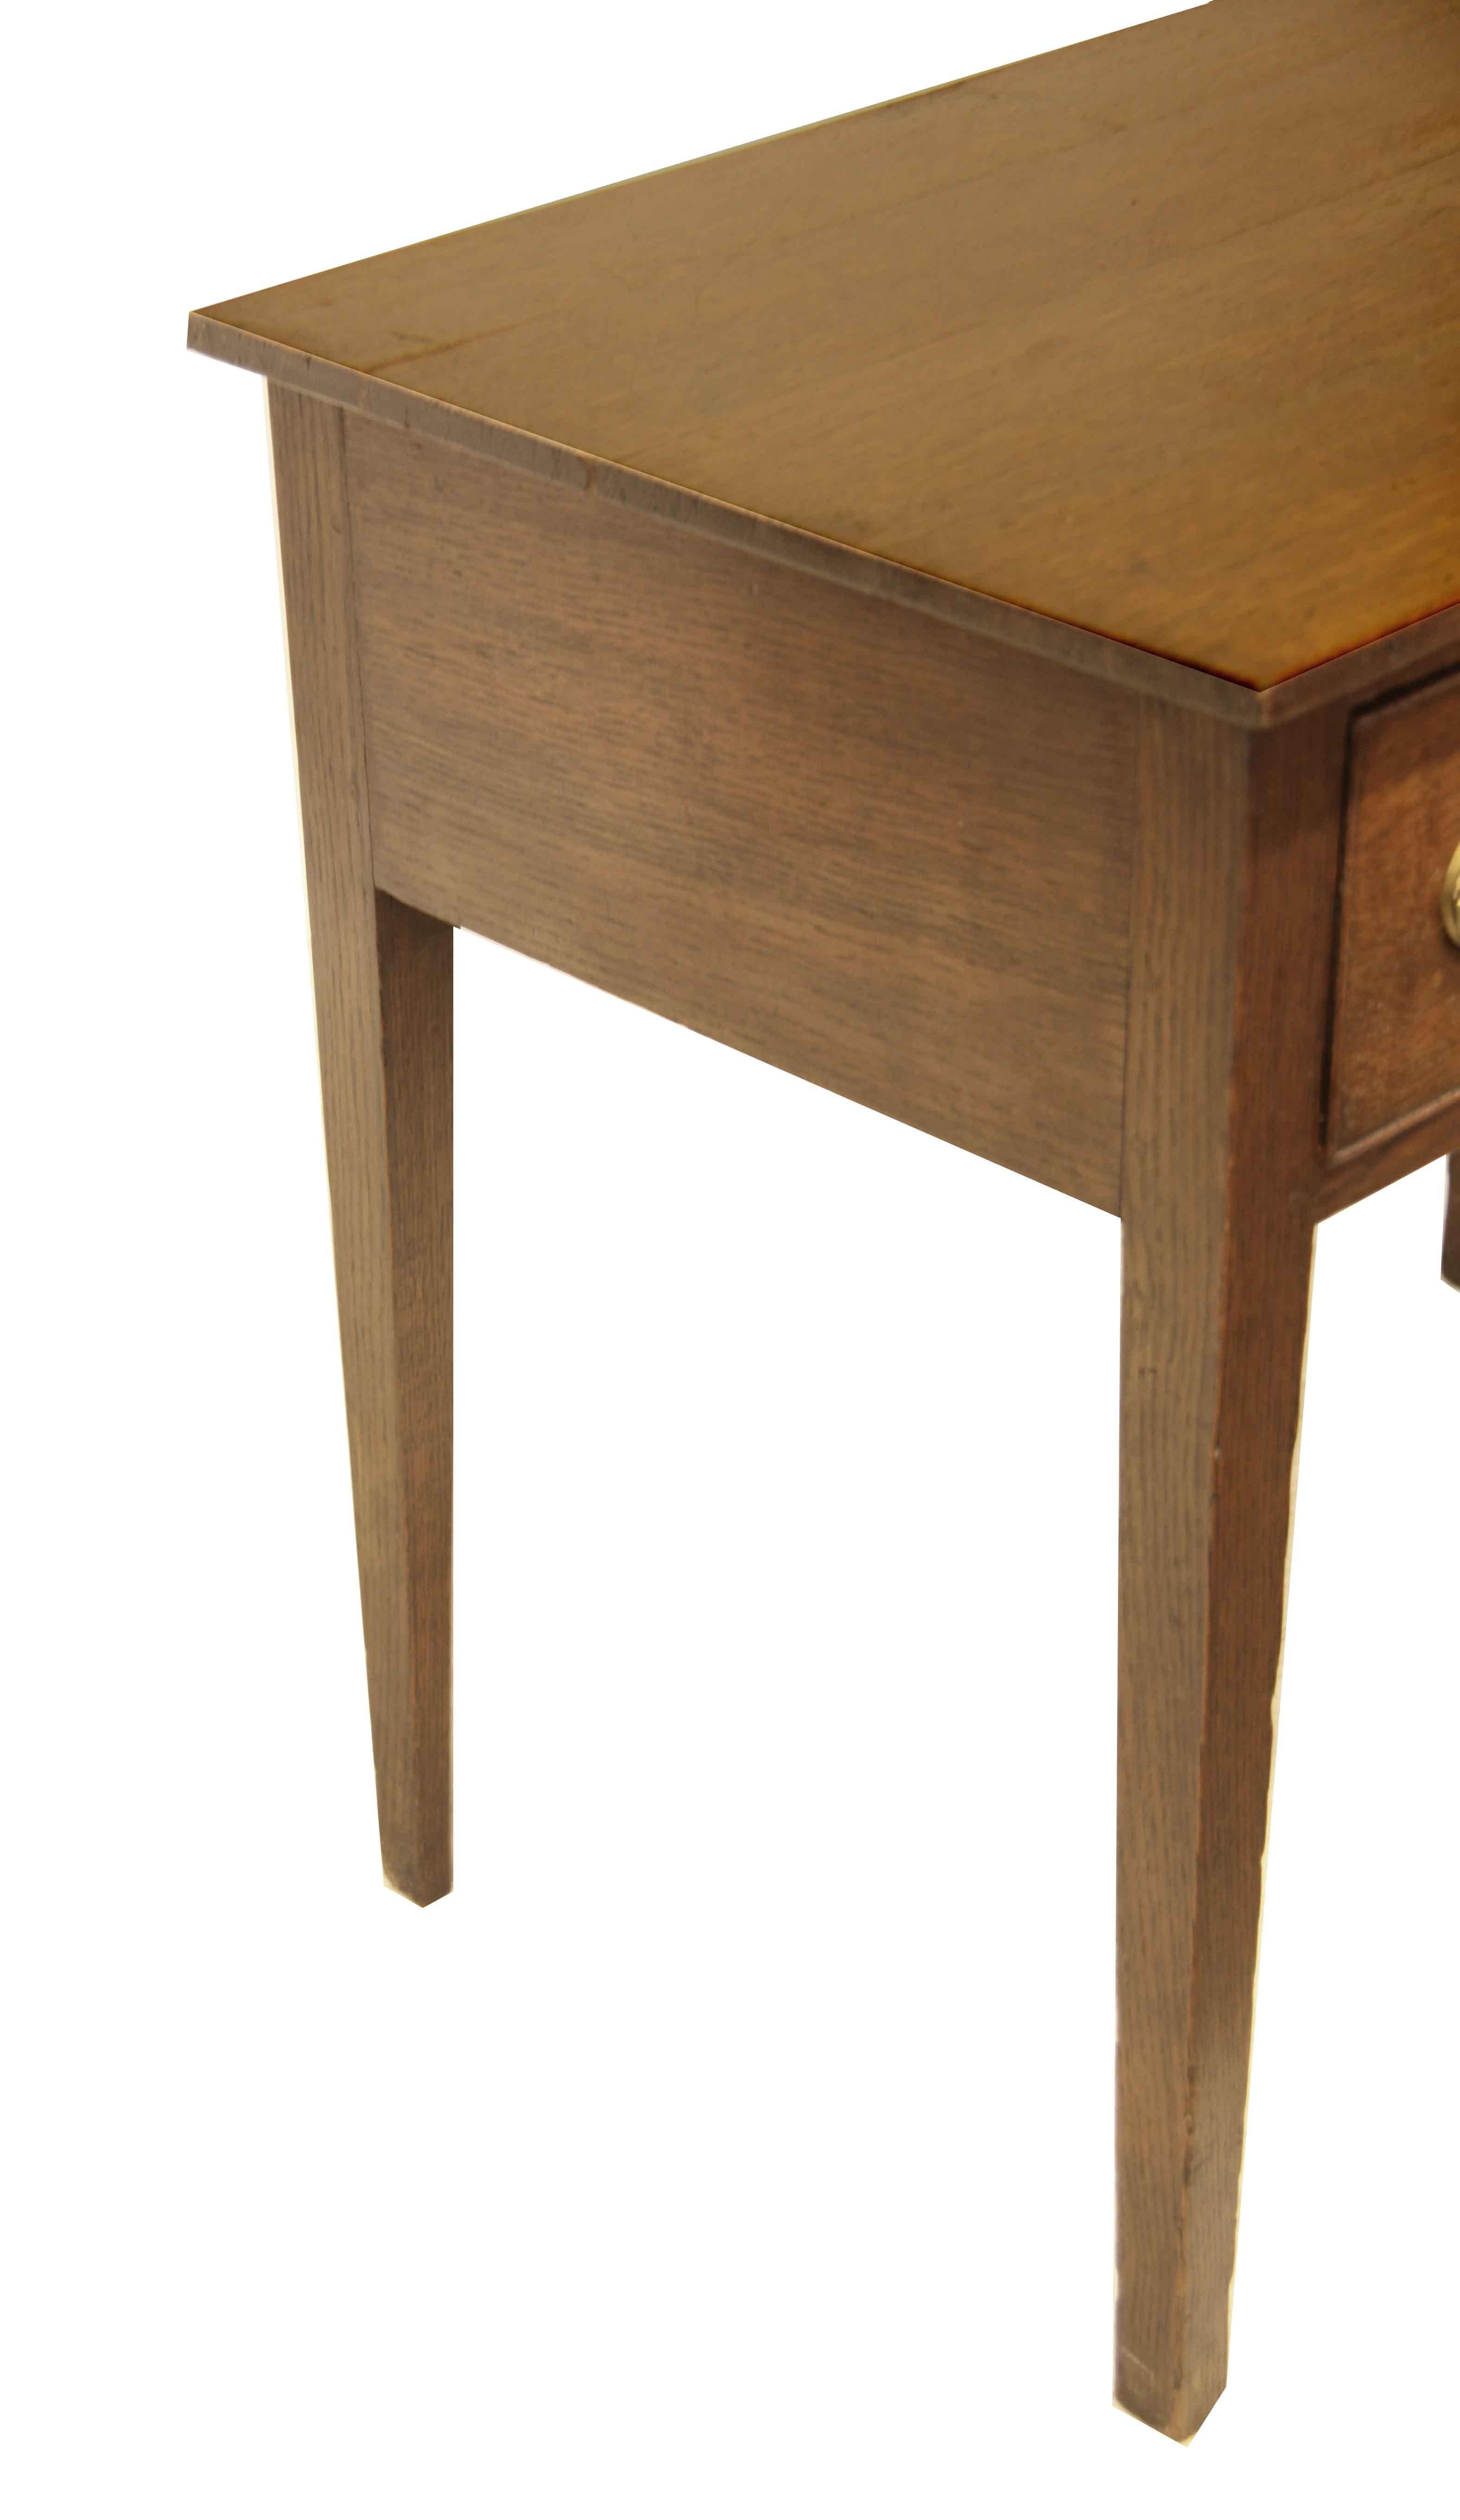 English oak Hepplewhite lowboy,  pleasant color and patina throughout this early 19th century lowboy; the oval ''urn'' brass pulls are correct for the period and the piece but are not original.  The legs are nicely tapered and well proportioned with